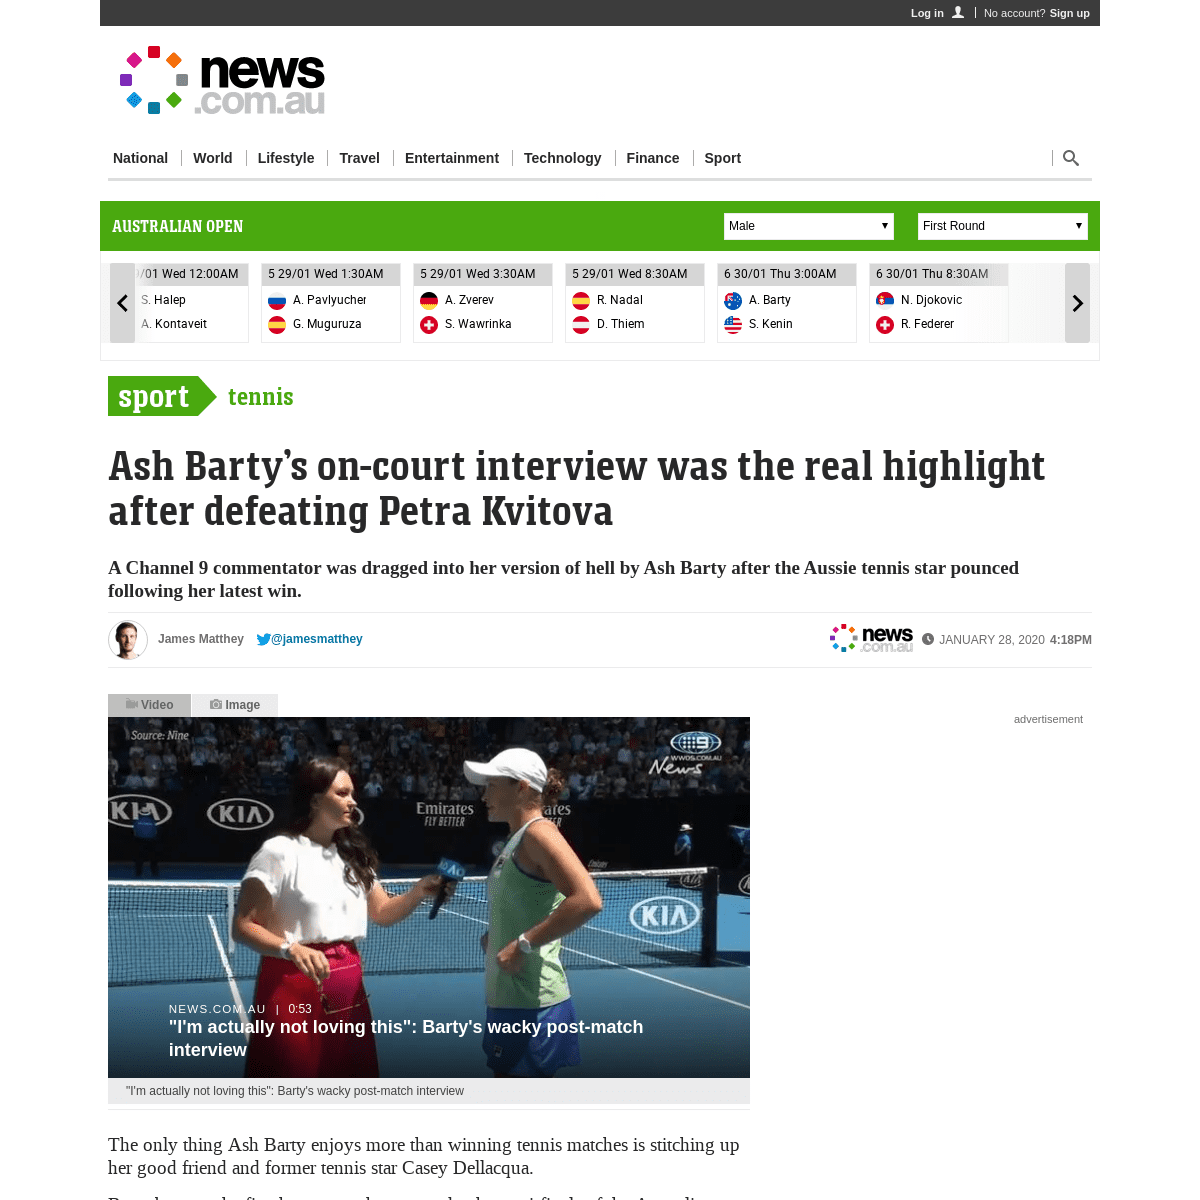 A complete backup of www.news.com.au/sport/tennis/ash-bartys-oncourt-interview-was-the-real-highlight-after-defeating-petra-kvit